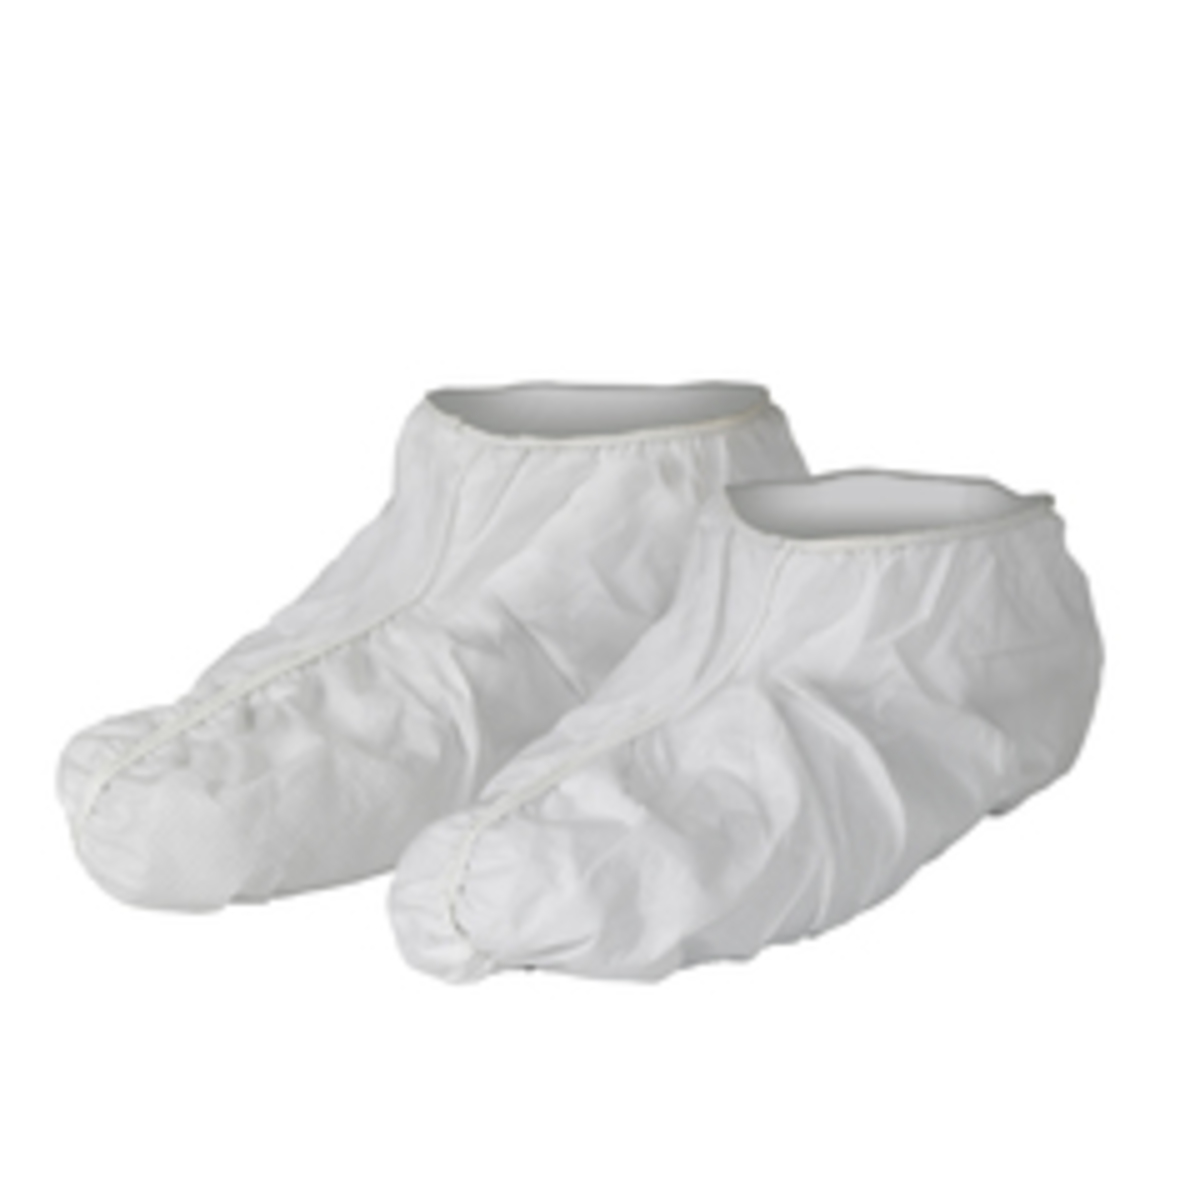 Kimberly-Clark Professional™ White KleenGuard™ A20 SMS Disposable Shoe Cover (Availability restrictions apply.)